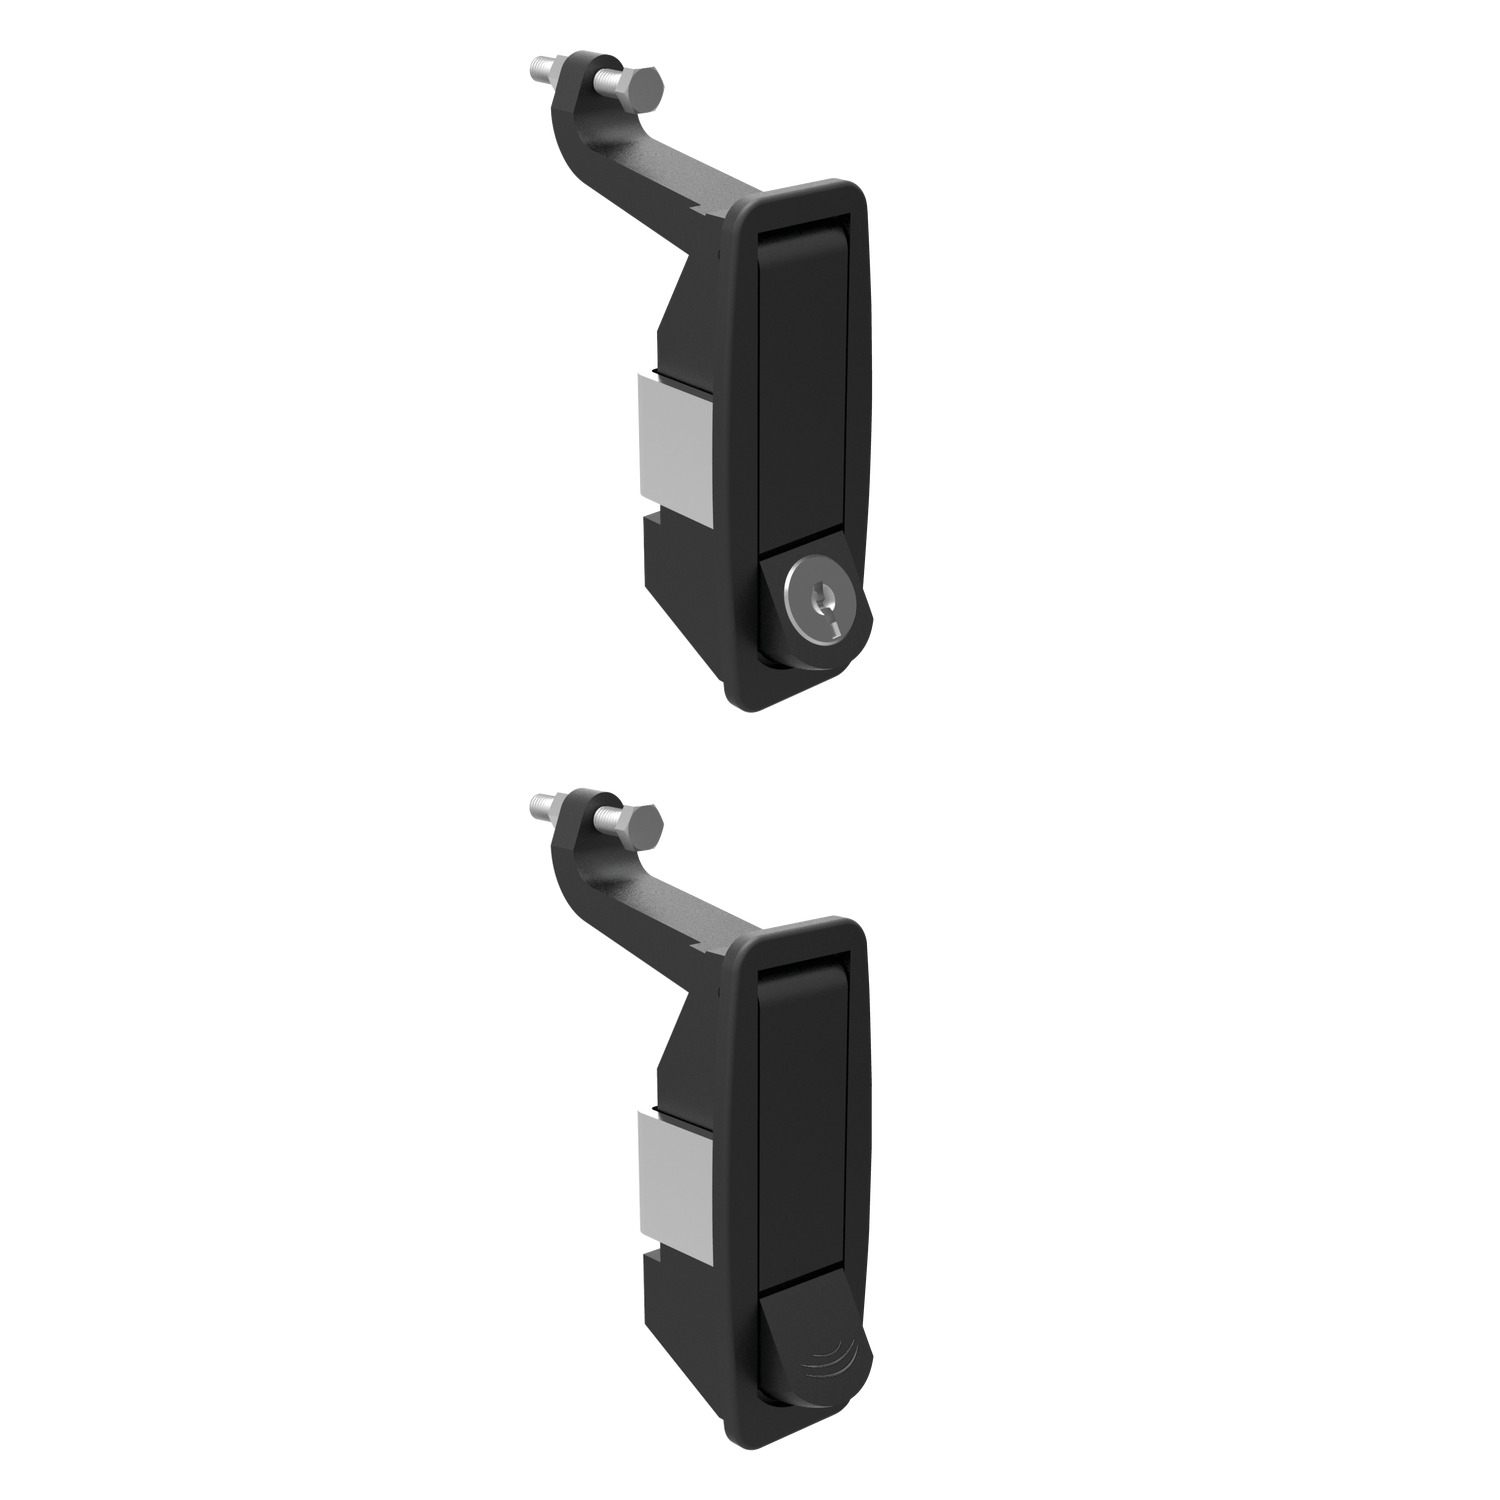 A1707.AW0710 Compression Latches and Locks Lever latch - adjustable grip - raised trigger - zinc. Black coated - Std. Cylinder - Keyed Alike - 0 to 24 mm grip